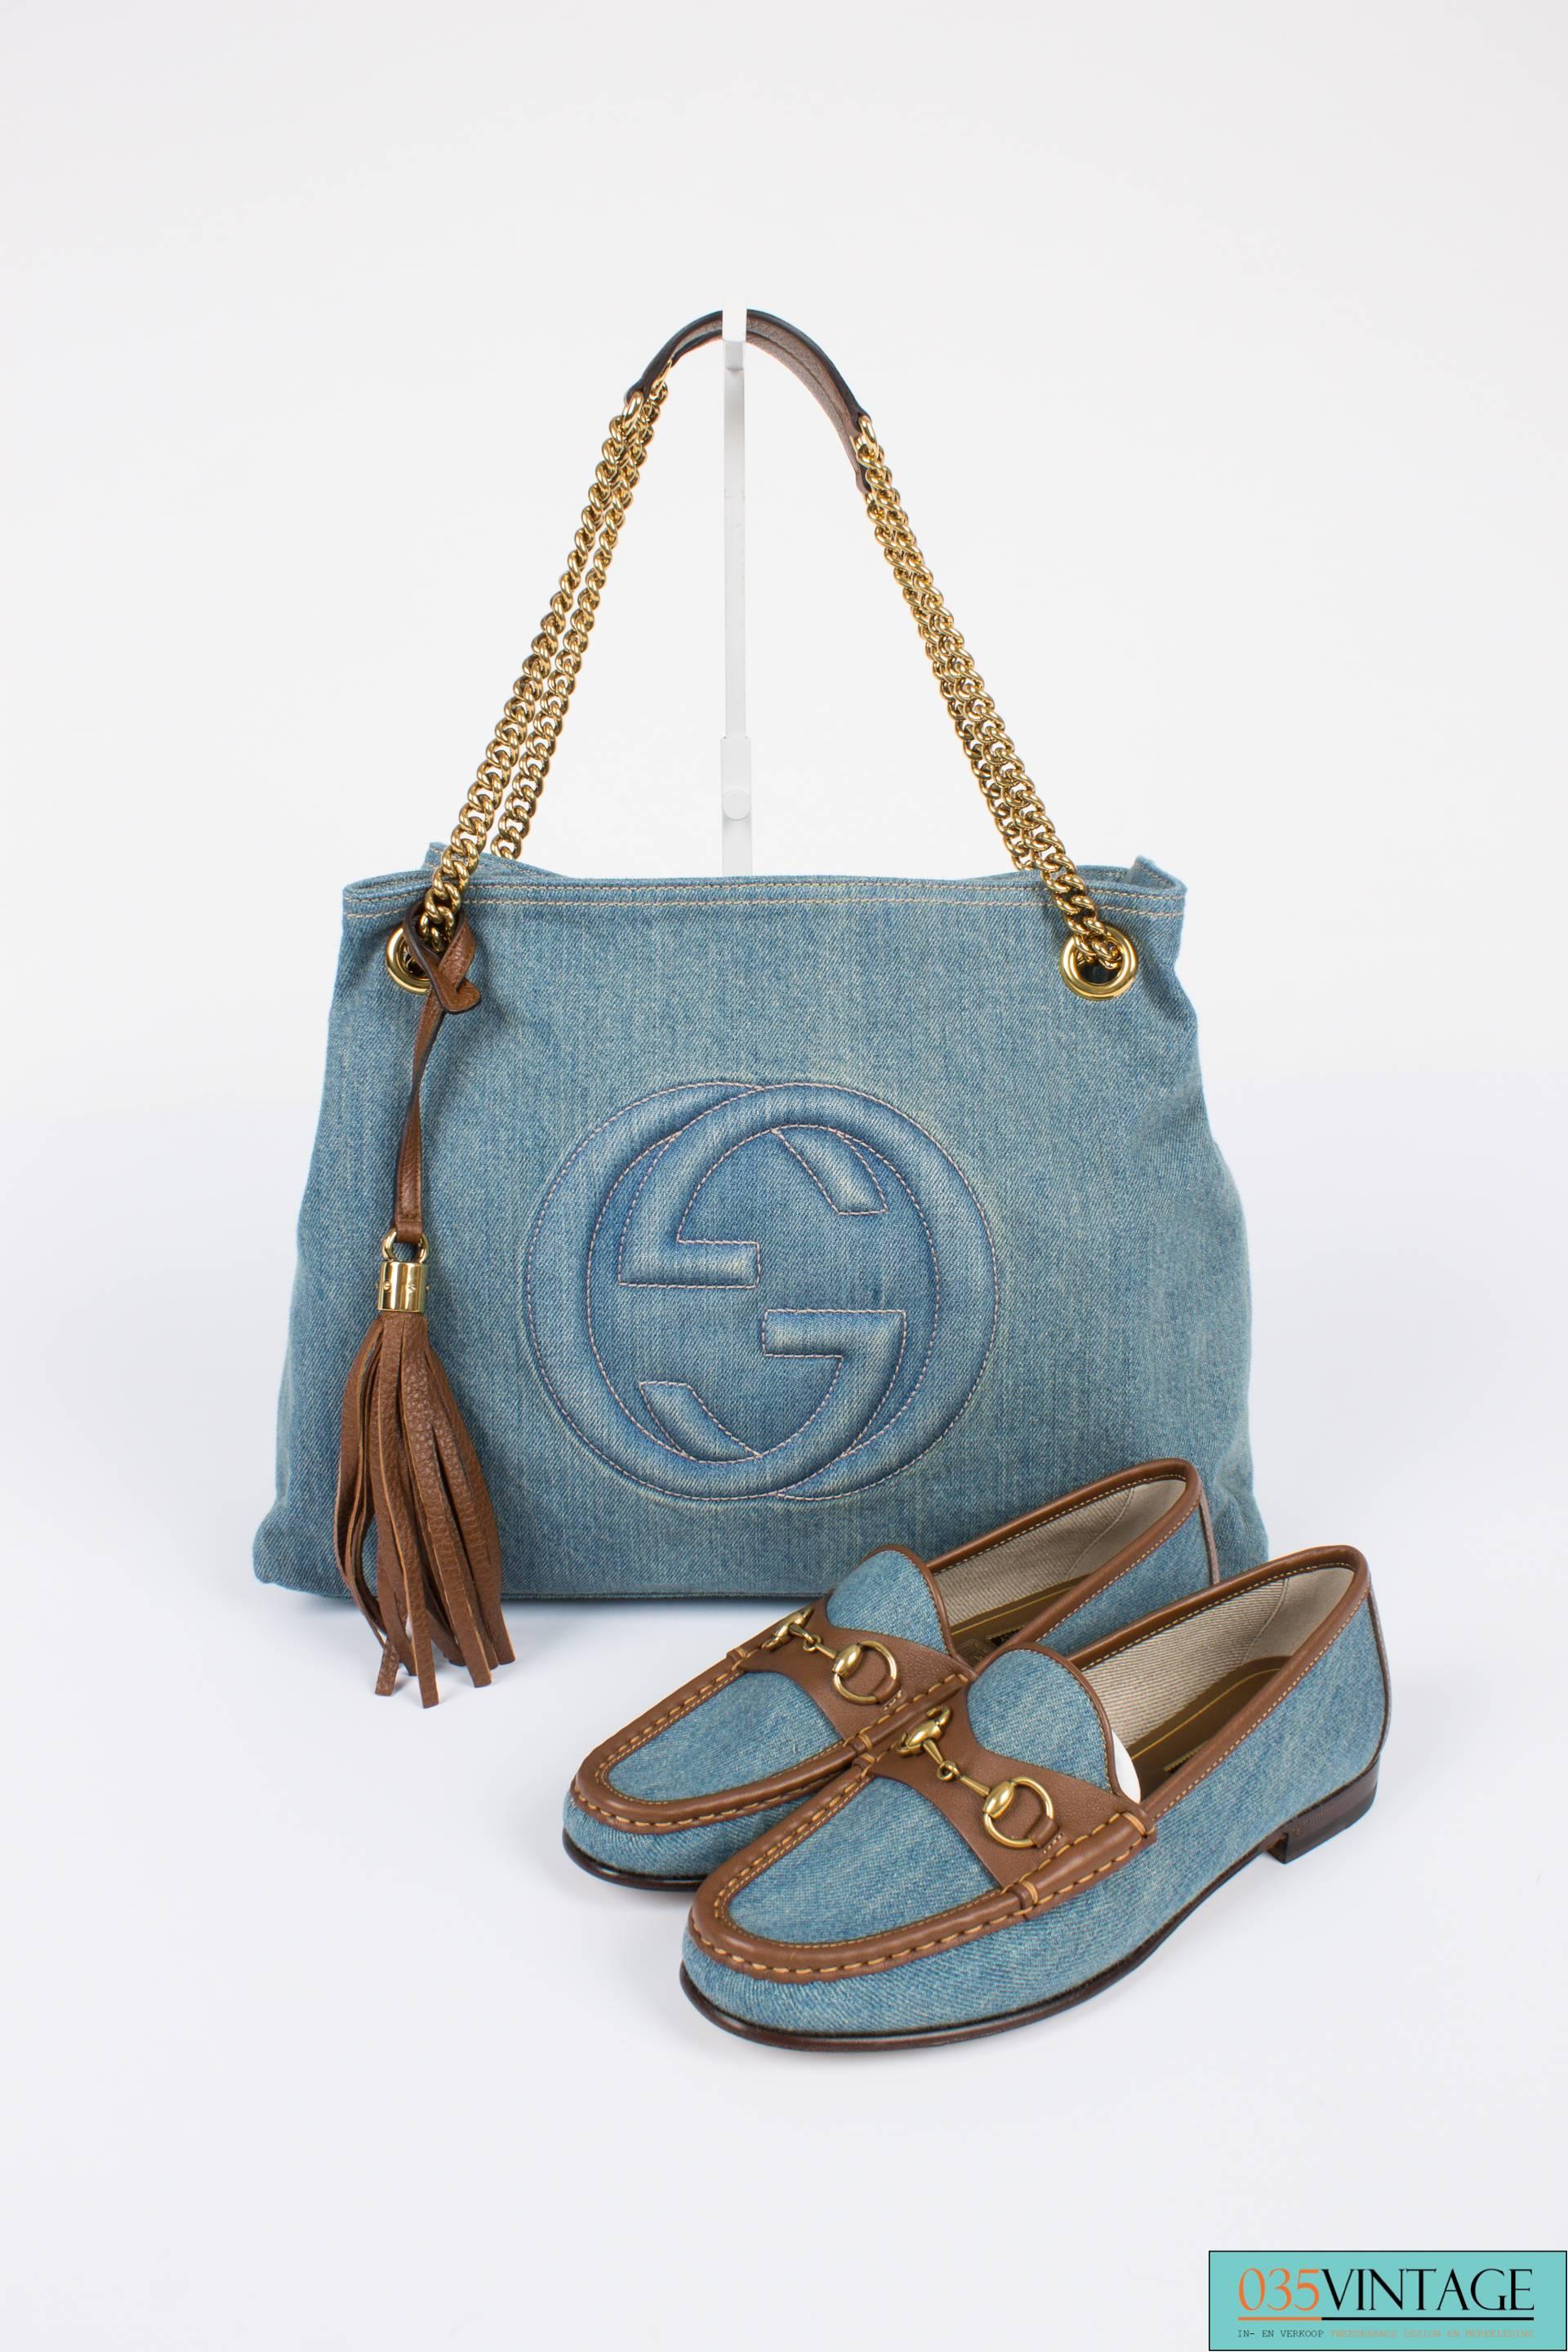 A blue denim bag by Gucci with brown leather trim and gold-tone hardware, a careless beauty!

This Gucci Blue Denim Medium Soho Tote Bag is fully crafted in light blue denim, a frontal stitched interlocking GG logo and the interior is lined with